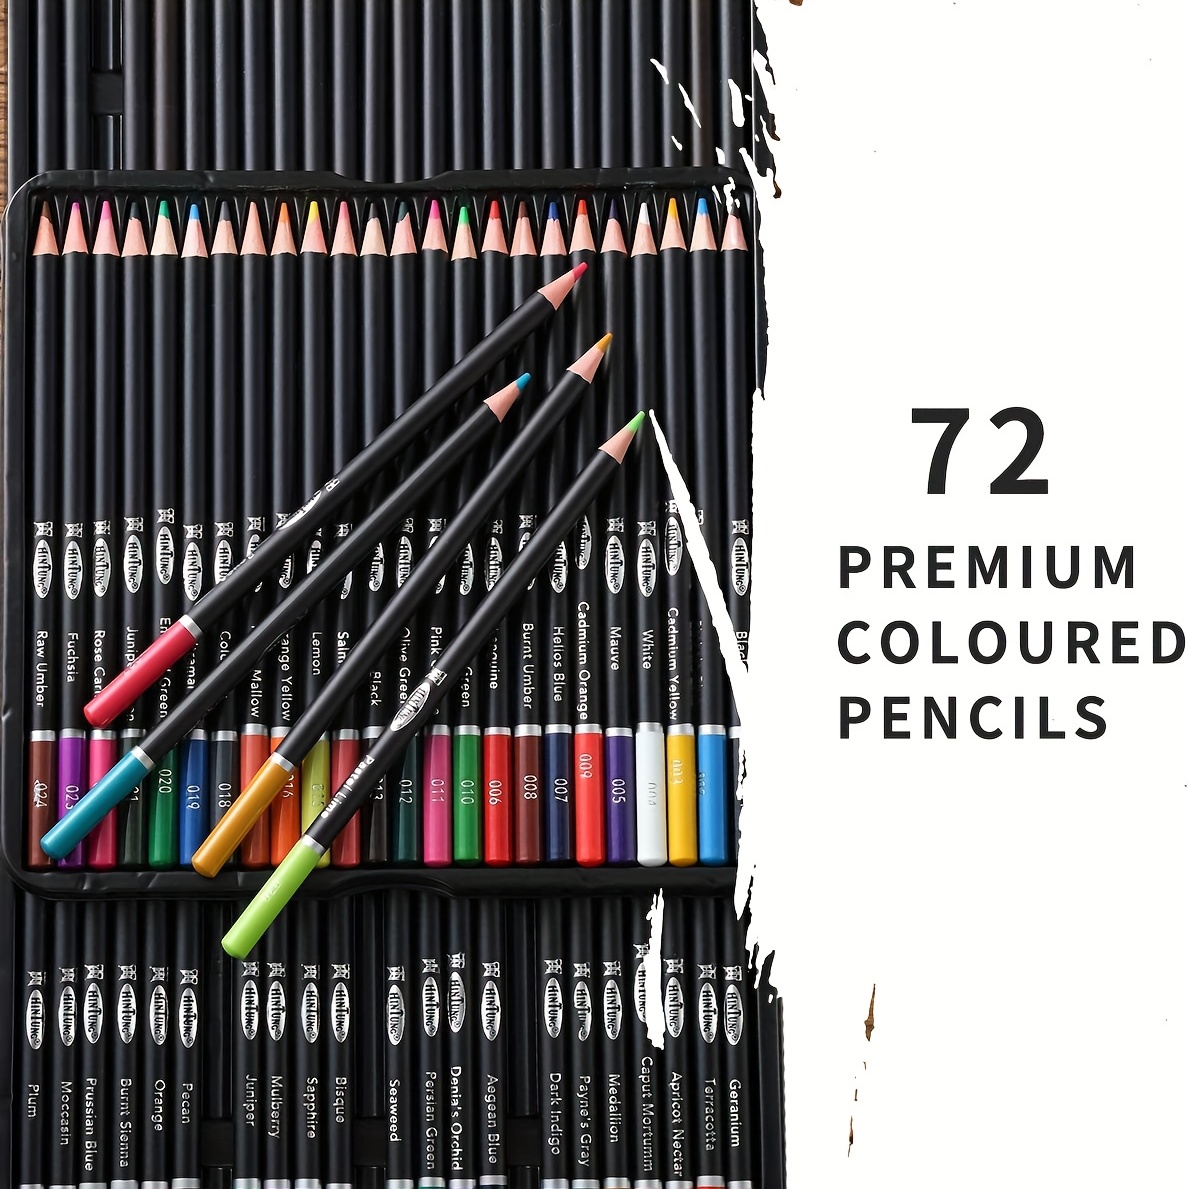 Ccfoud Professional Colored Drawing Pencils Set, Set Of 72 Colors, Skin  Tone Colored Pencils For Portraits And Skintone Artists ,for Beginners And  Ar